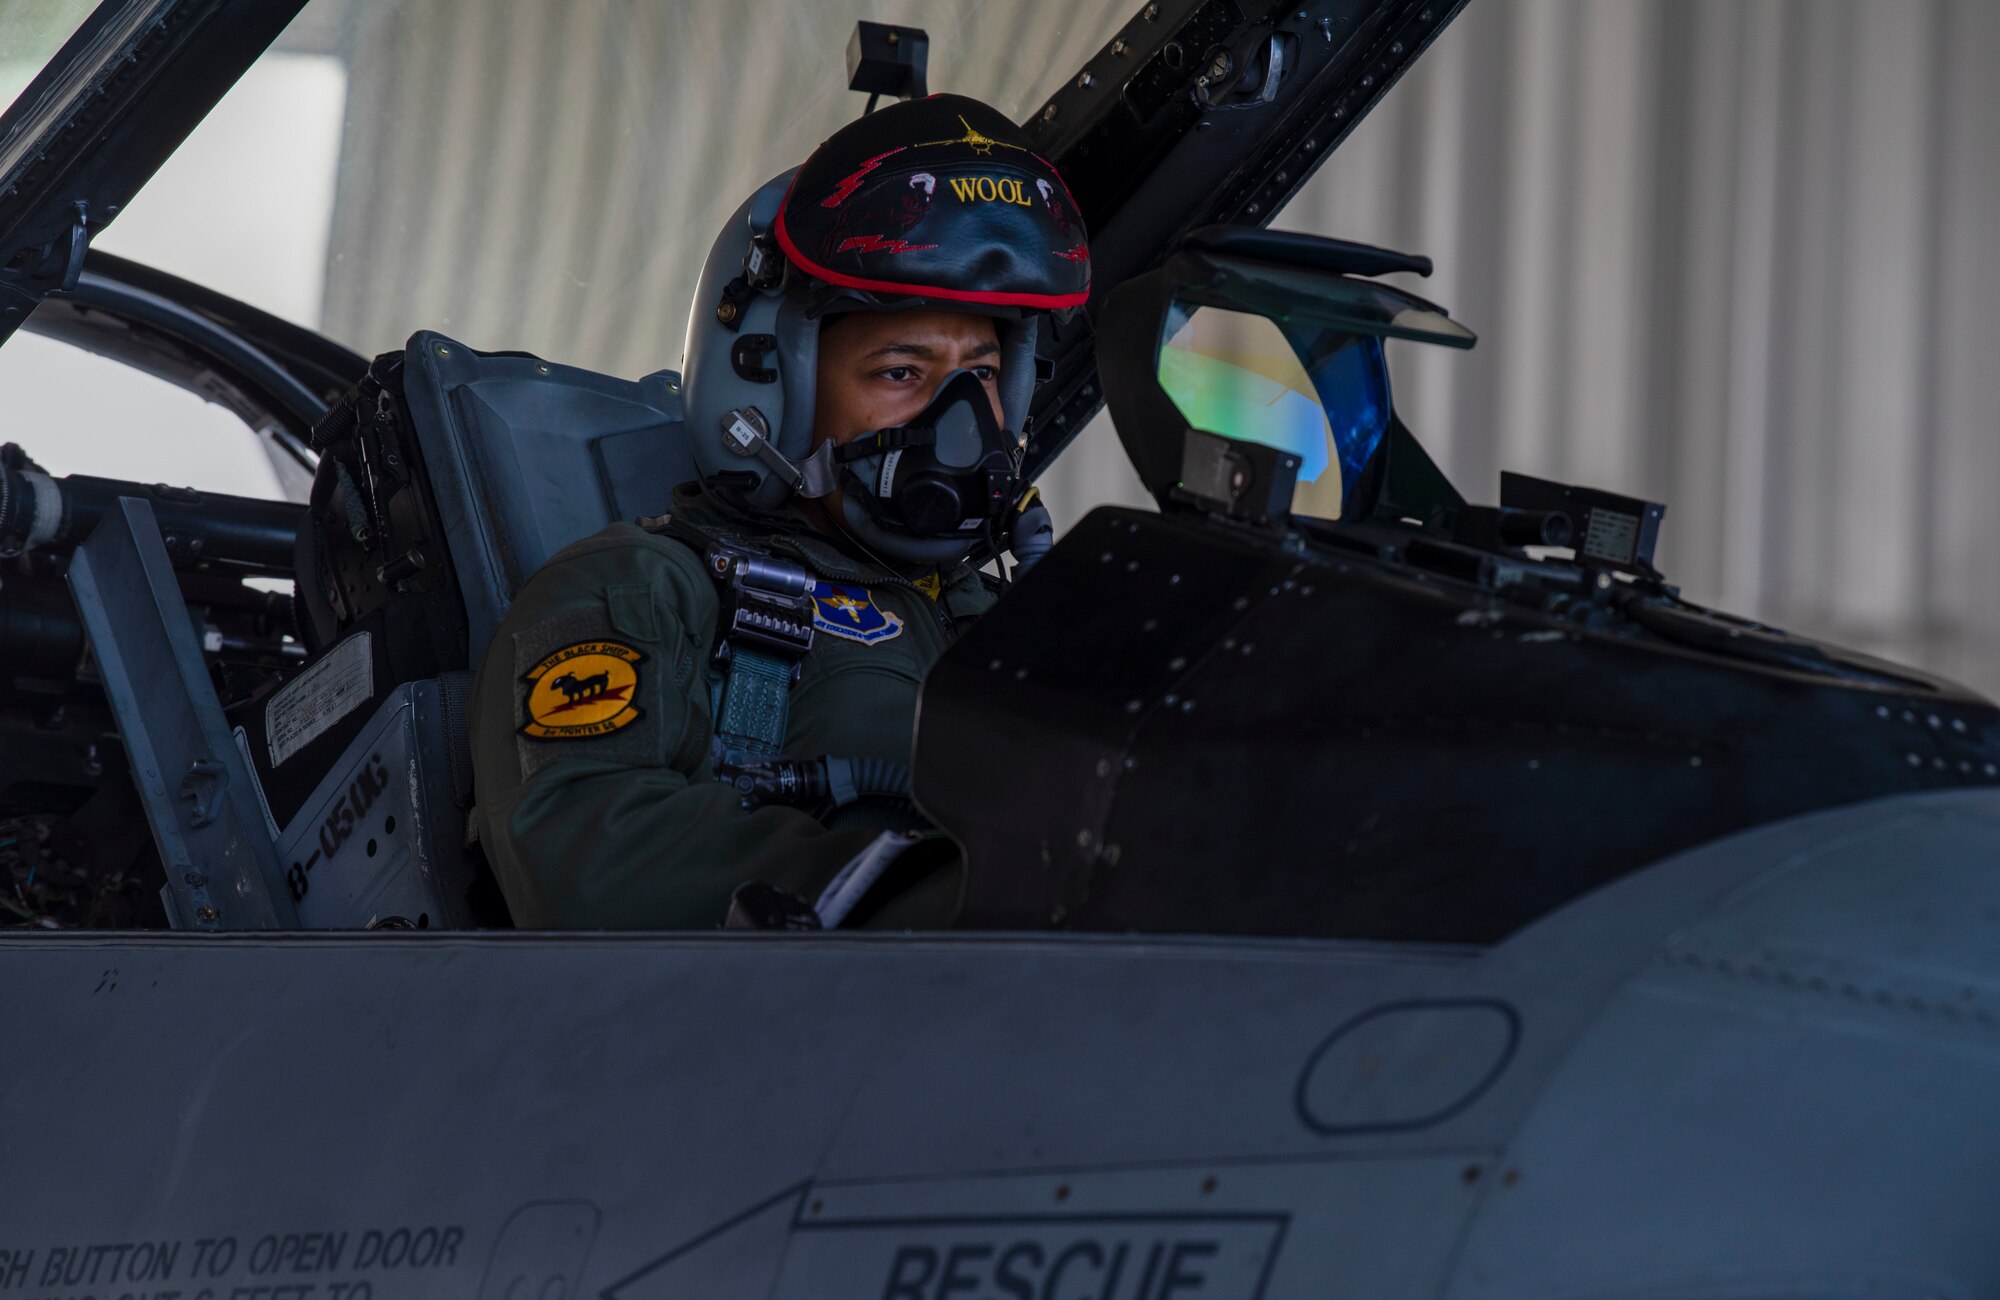 Capt. Andre Golson, 8th Fighter Squadron instructor pilot, prepares to takeoff in an F-16 Viper, Feb. 18, 2021, on Holloman Air Force Base, N.M. Golson is one of two Black F-16 instructor pilots on Holloman. (U.S. Air Force photo by Airman 1st Class Quion Lowe)